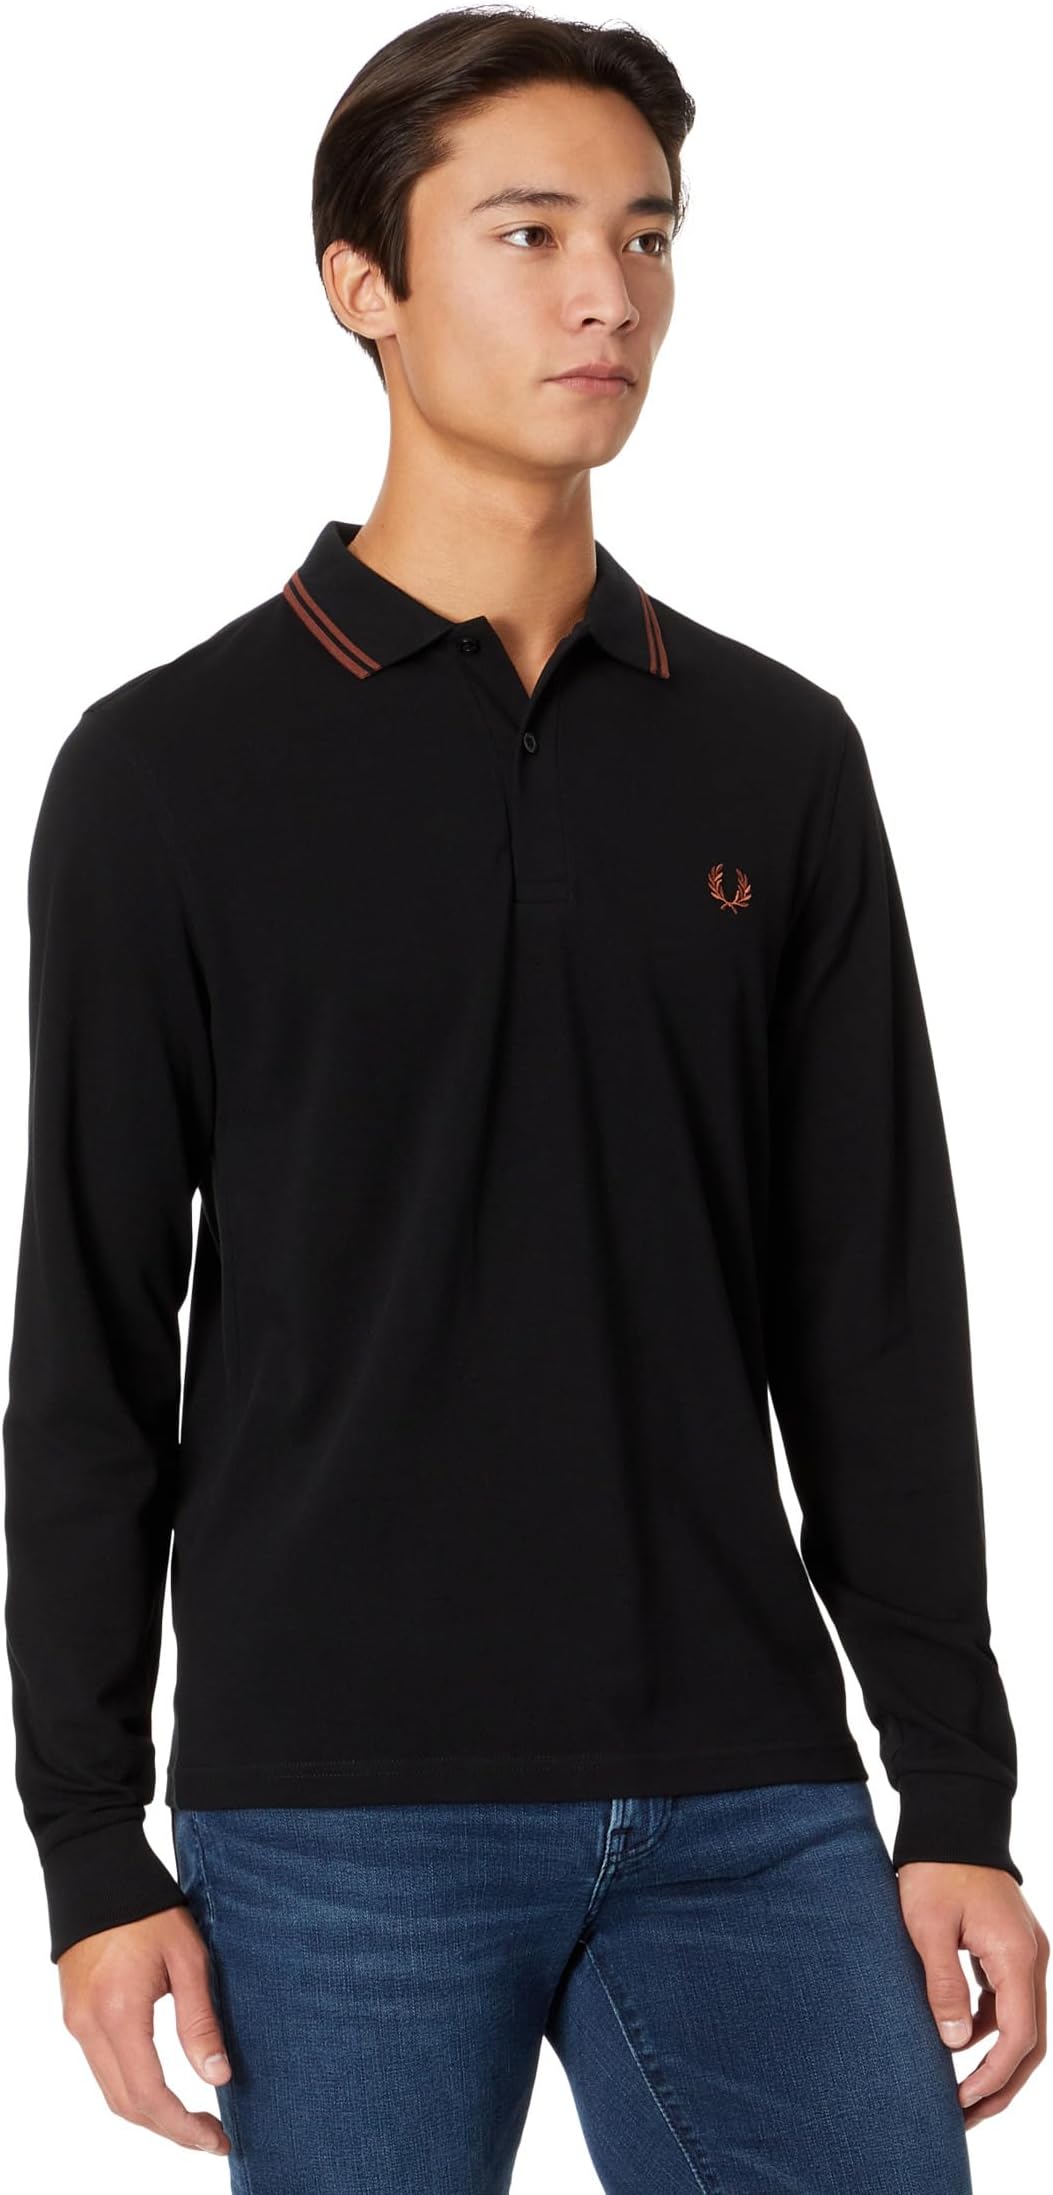 Рубашка-поло Long Sleeve Twin Tipped Shirt Fred Perry, цвет Black/Whisky Brown рубашка fred perry panel polo цвет whisky brown